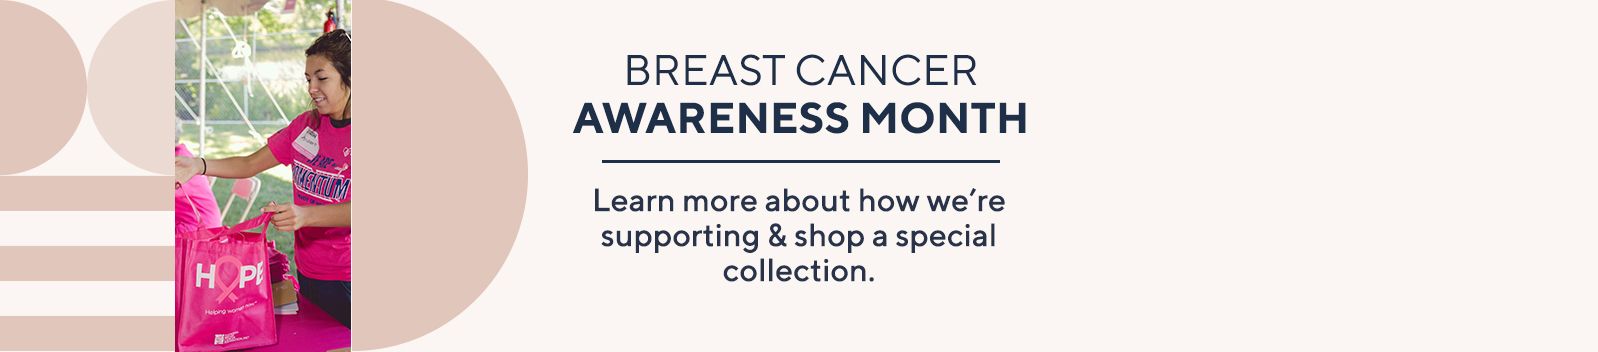 Breast Cancer Awareness Month - Learn more about how we're supporting & shop a special collection.  